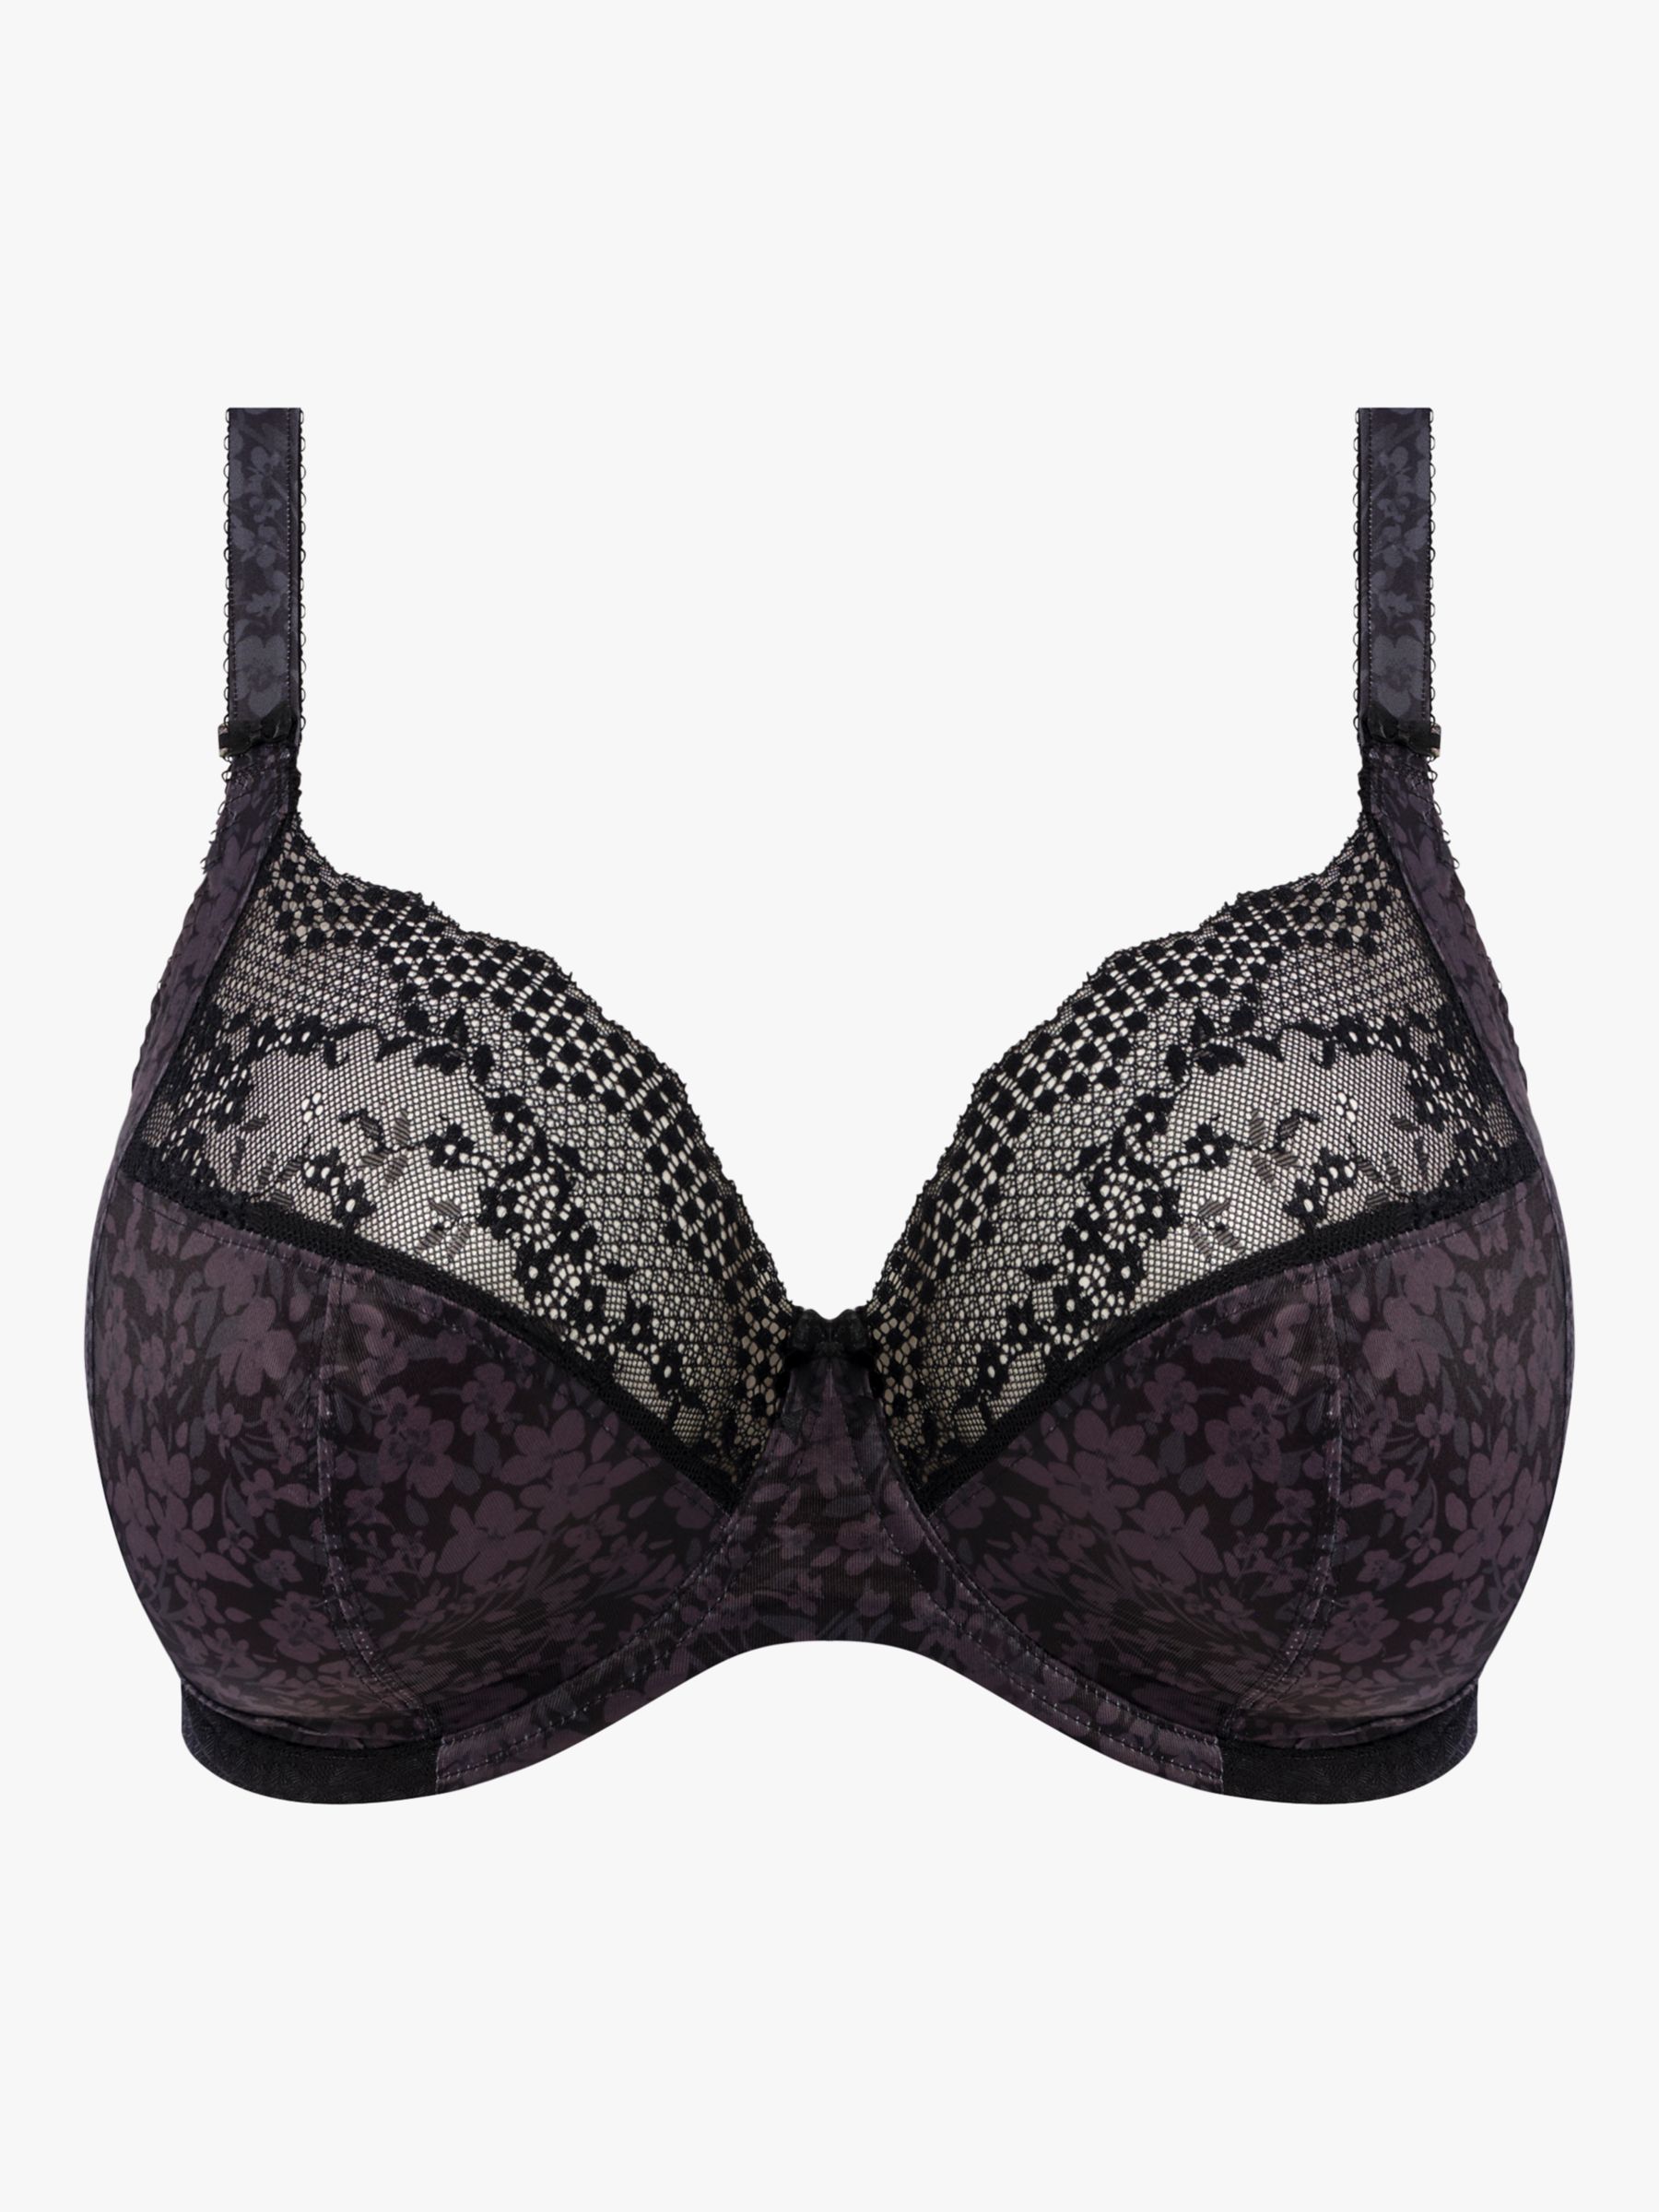 Lucie Underwire Plunge Bra by Elomi - Embrace